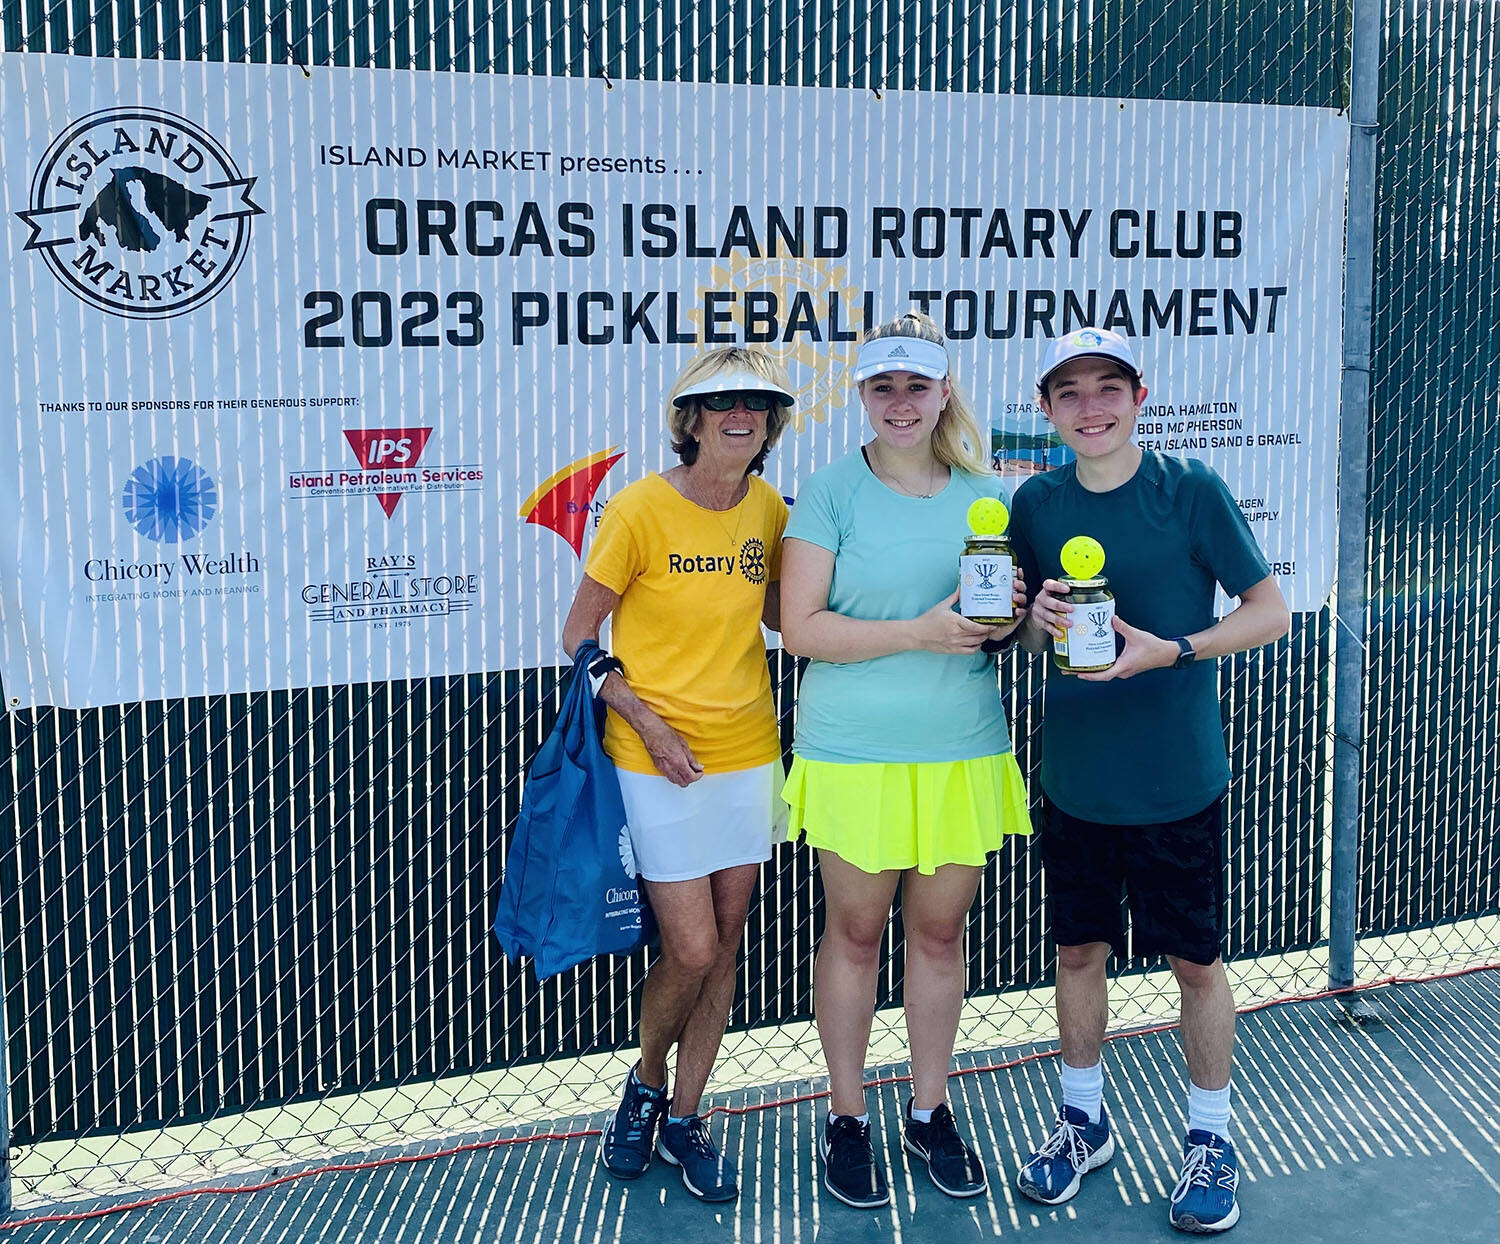 Tournament director Linda Hamilton with Group B Mixed Doubles second-place winners Monica Connell and Ethan Brazil.